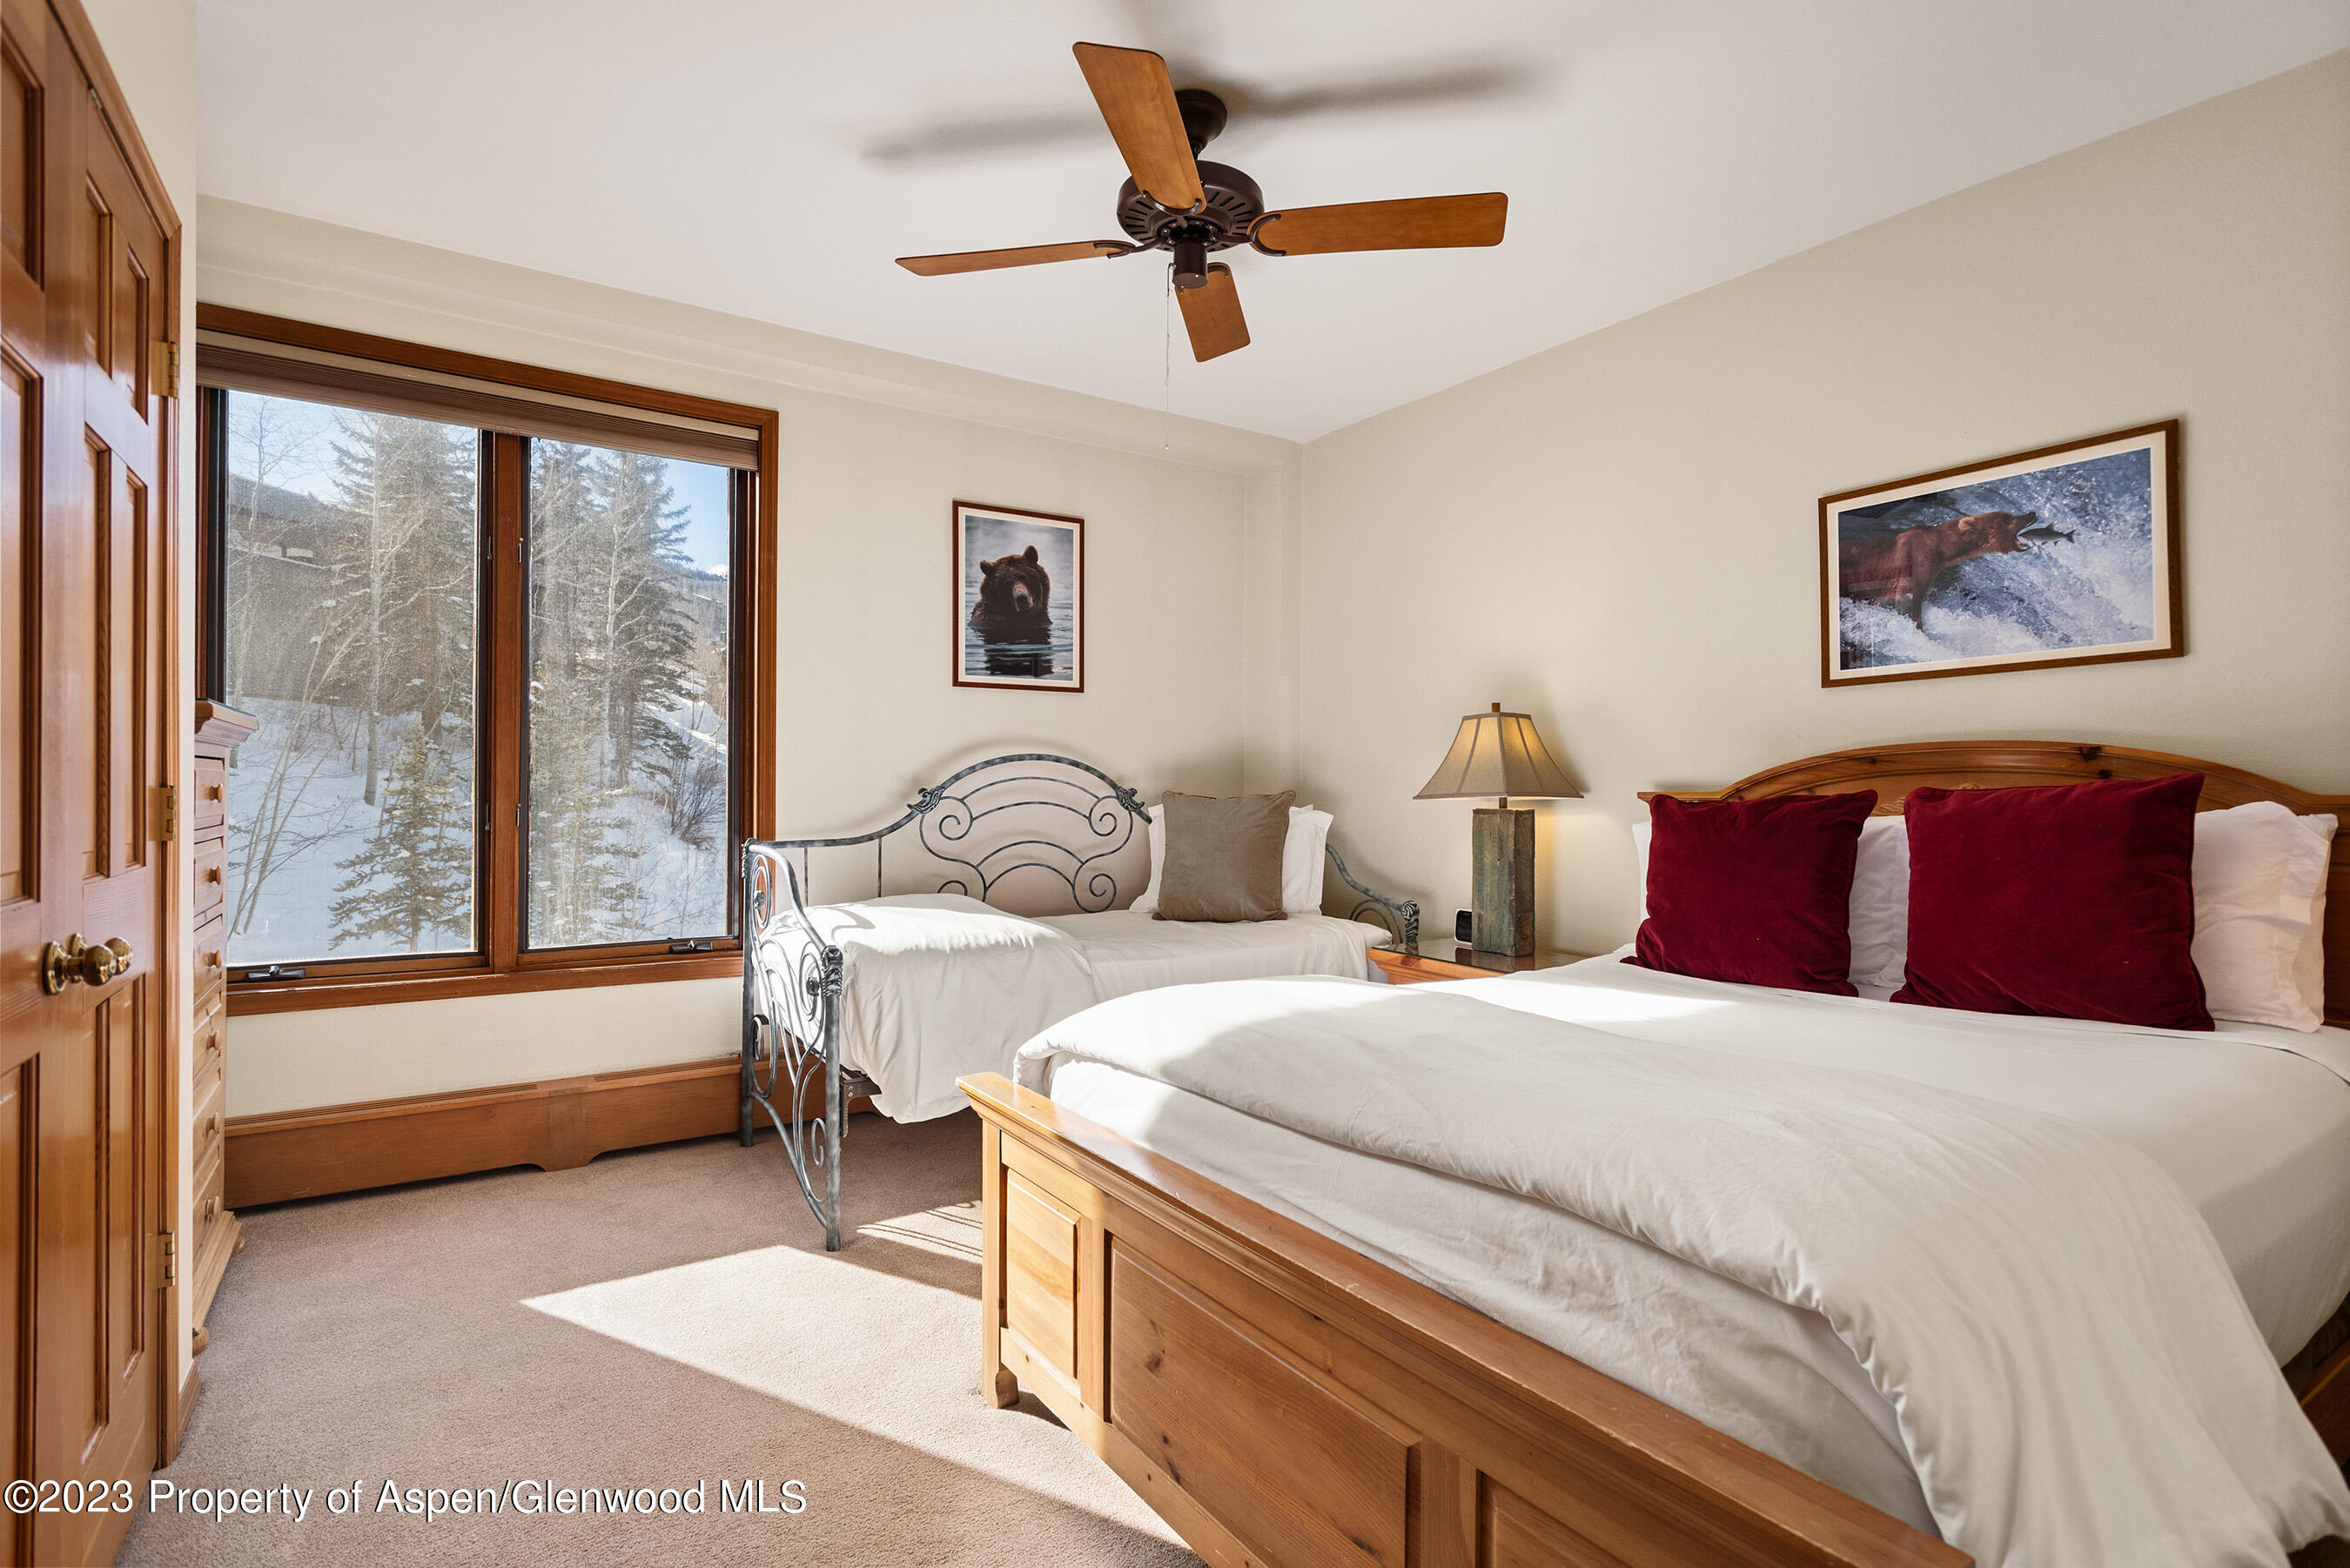 476 Wood Road, Snowmass Village, Colorado, 81615, United States, 2 Bedrooms Bedrooms, ,2 BathroomsBathrooms,Residential,For Sale,476 Wood Road,1412849